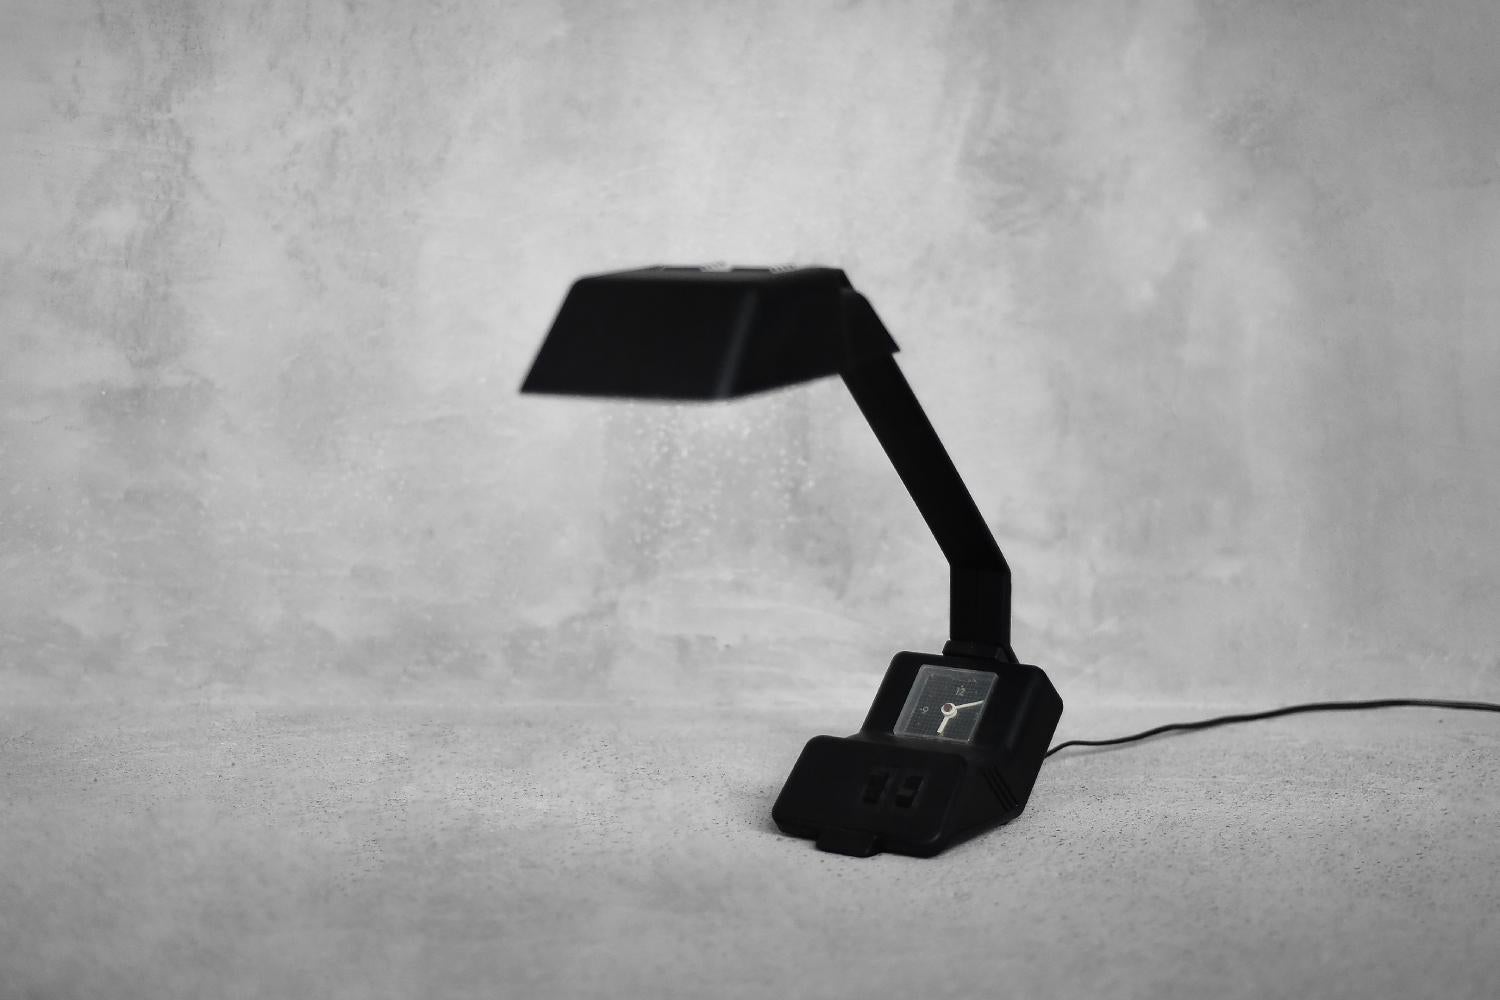 This iconic Type 27.B.101 desk lamp was designed by Wojciech Dybek for POLAMP - FSOiUT PUŁTUSK in 1987. The lamp is made of black plastic. It has two light points activated by separate switches located on the base. The lamp is also equipped with a